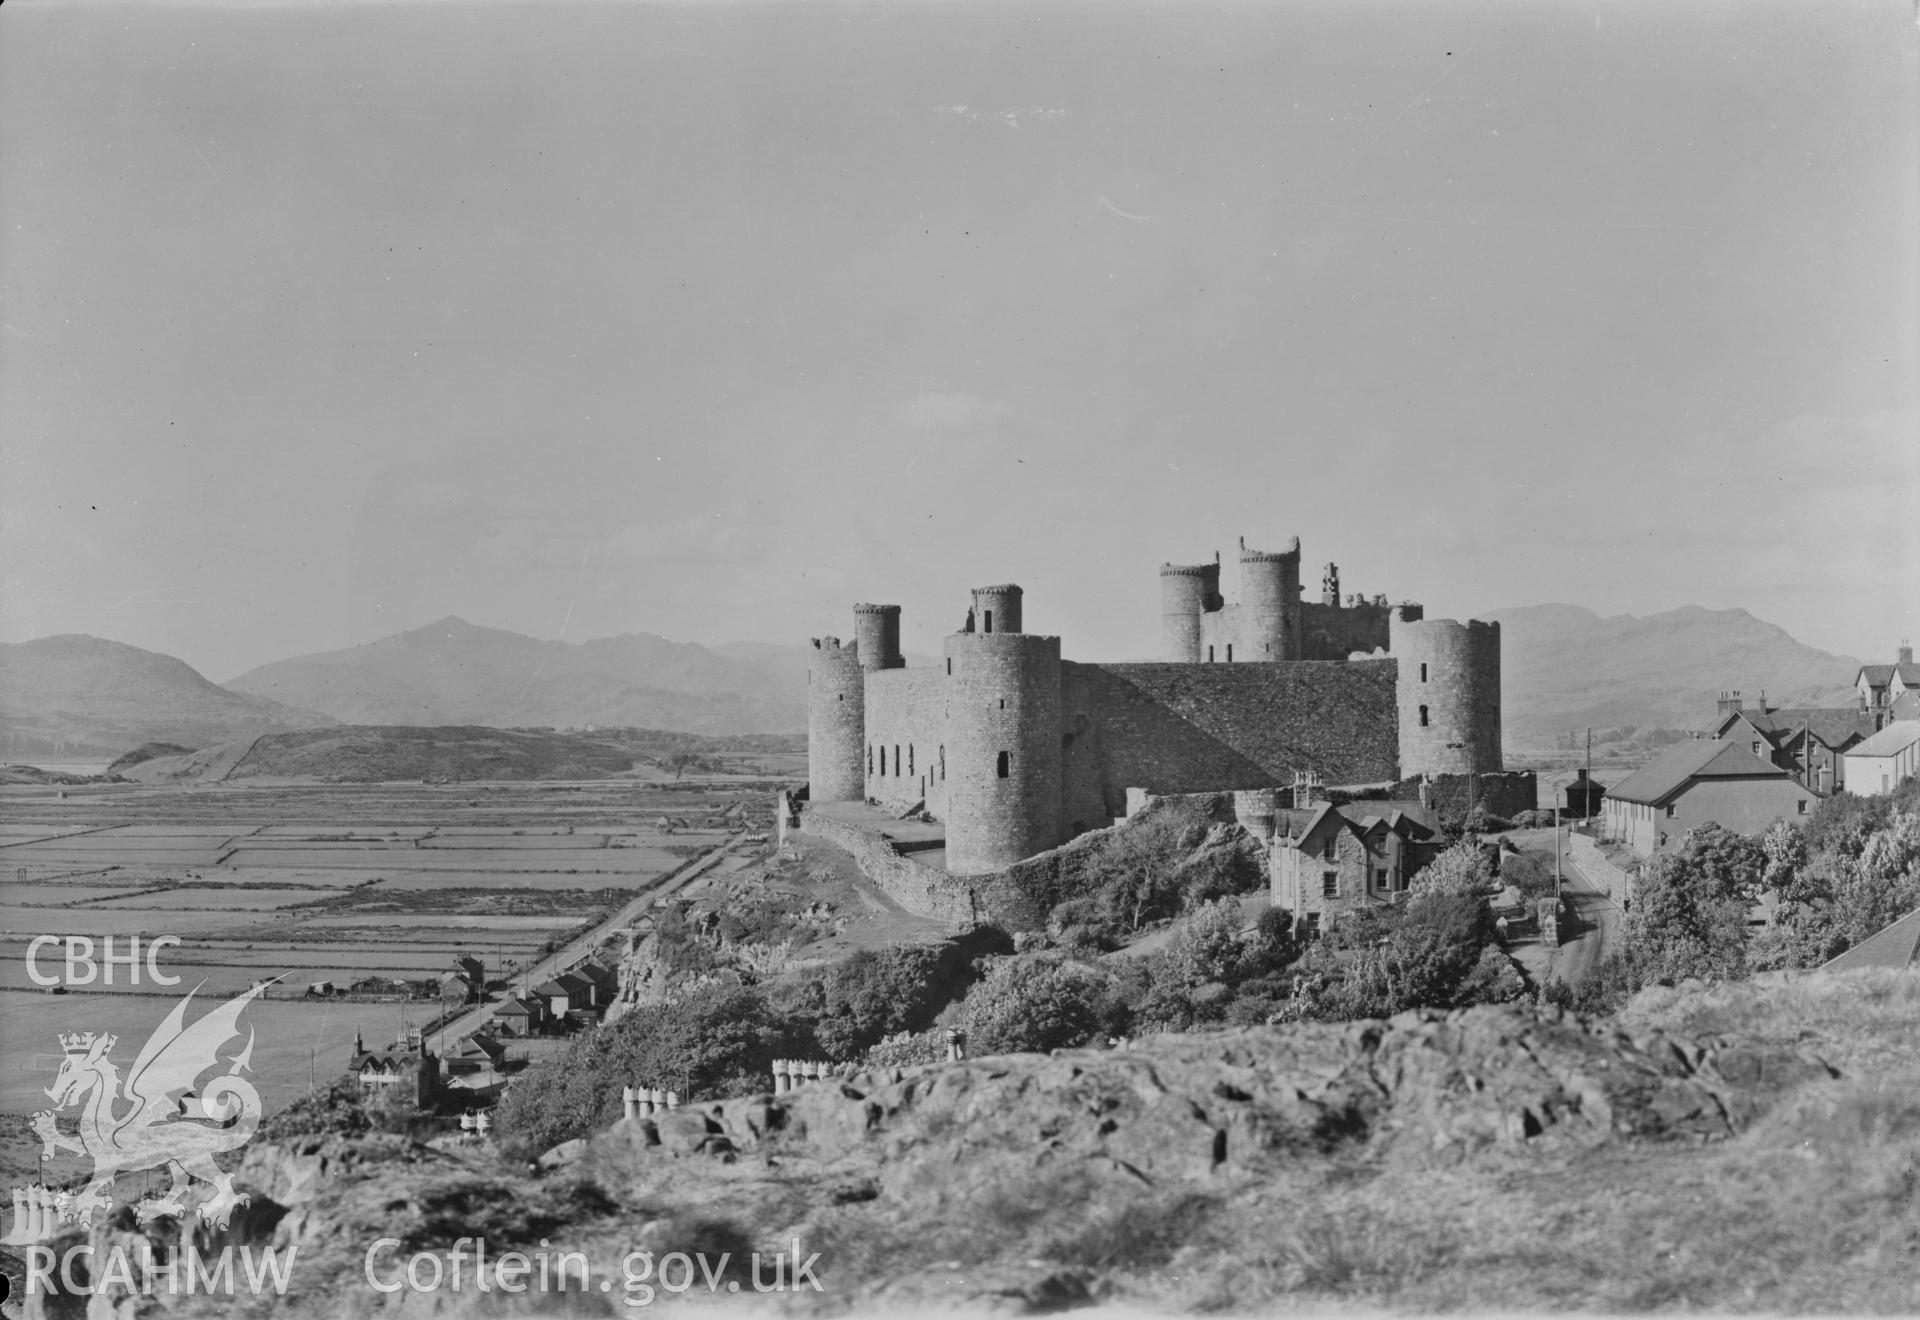 Digital copy of a nitrate negative showing view of Harlech Castle, dated 1964.